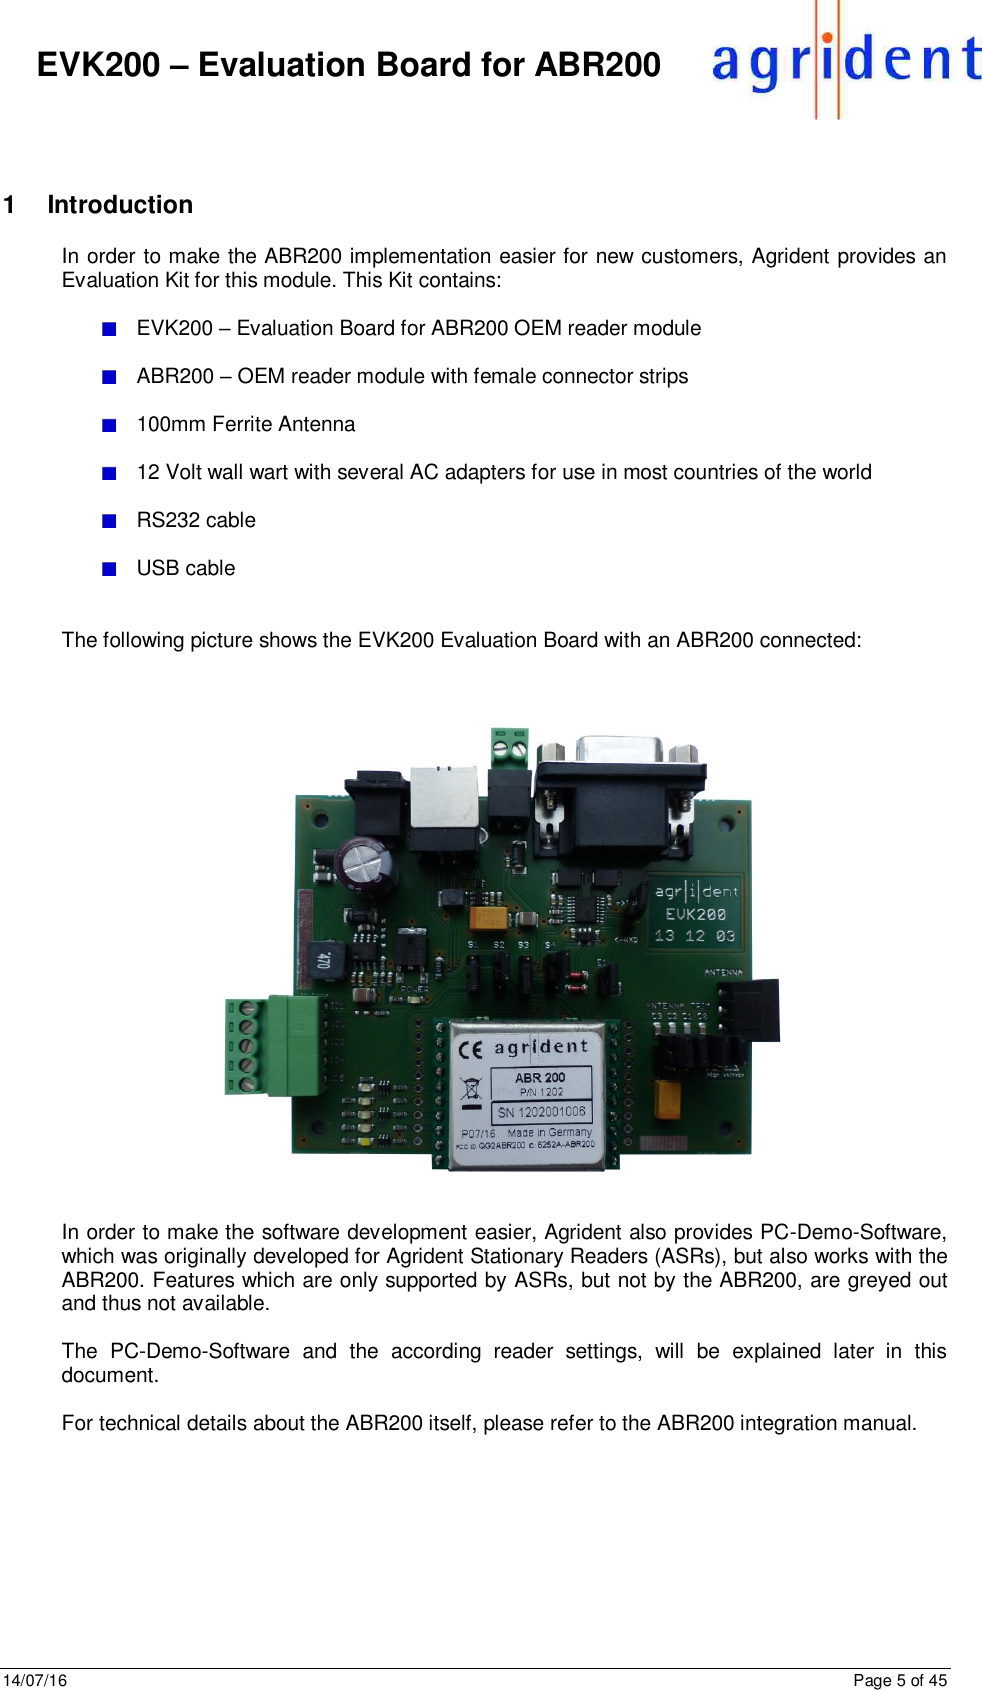 14/07/16      Page 5 of 45      EVK200 – Evaluation Board for ABR200  1  Introduction In order to make the ABR200 implementation easier for new customers, Agrident provides an Evaluation Kit for this module. This Kit contains:    EVK200 – Evaluation Board for ABR200 OEM reader module    ABR200 – OEM reader module with female connector strips    100mm Ferrite Antenna    12 Volt wall wart with several AC adapters for use in most countries of the world    RS232 cable    USB cable   The following picture shows the EVK200 Evaluation Board with an ABR200 connected:       In order to make the software development easier, Agrident also provides PC-Demo-Software, which was originally developed for Agrident Stationary Readers (ASRs), but also works with the ABR200. Features which are only supported by ASRs, but not by the ABR200, are greyed out and thus not available.  The  PC-Demo-Software  and  the  according  reader  settings,  will  be  explained  later  in  this document.   For technical details about the ABR200 itself, please refer to the ABR200 integration manual.   